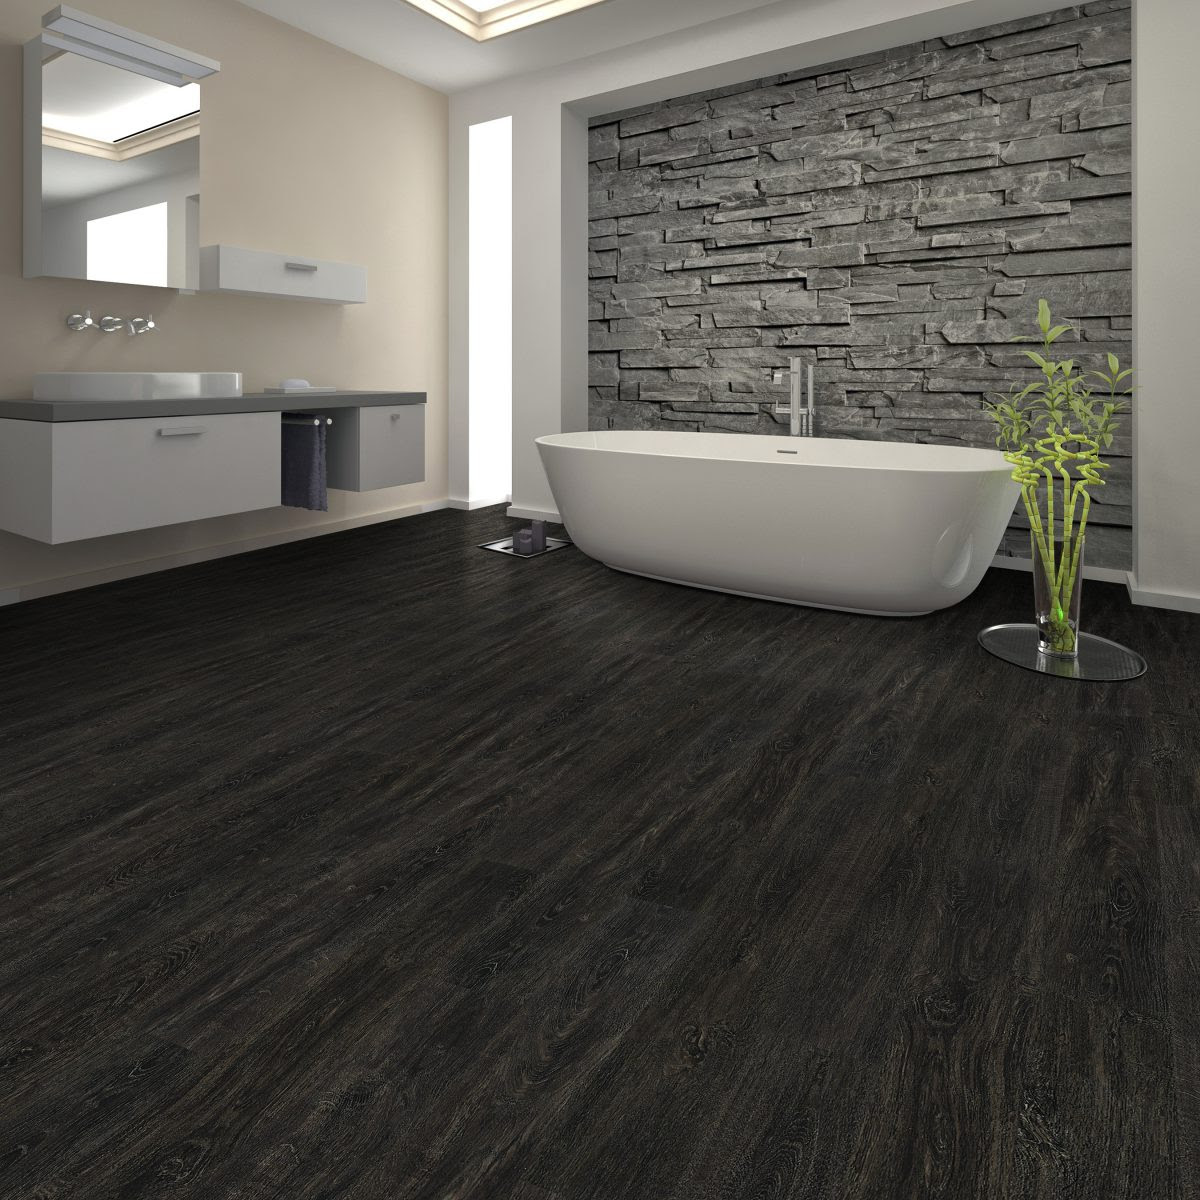 5 Flooring Options for Kitchens and Bathrooms | Empire ...